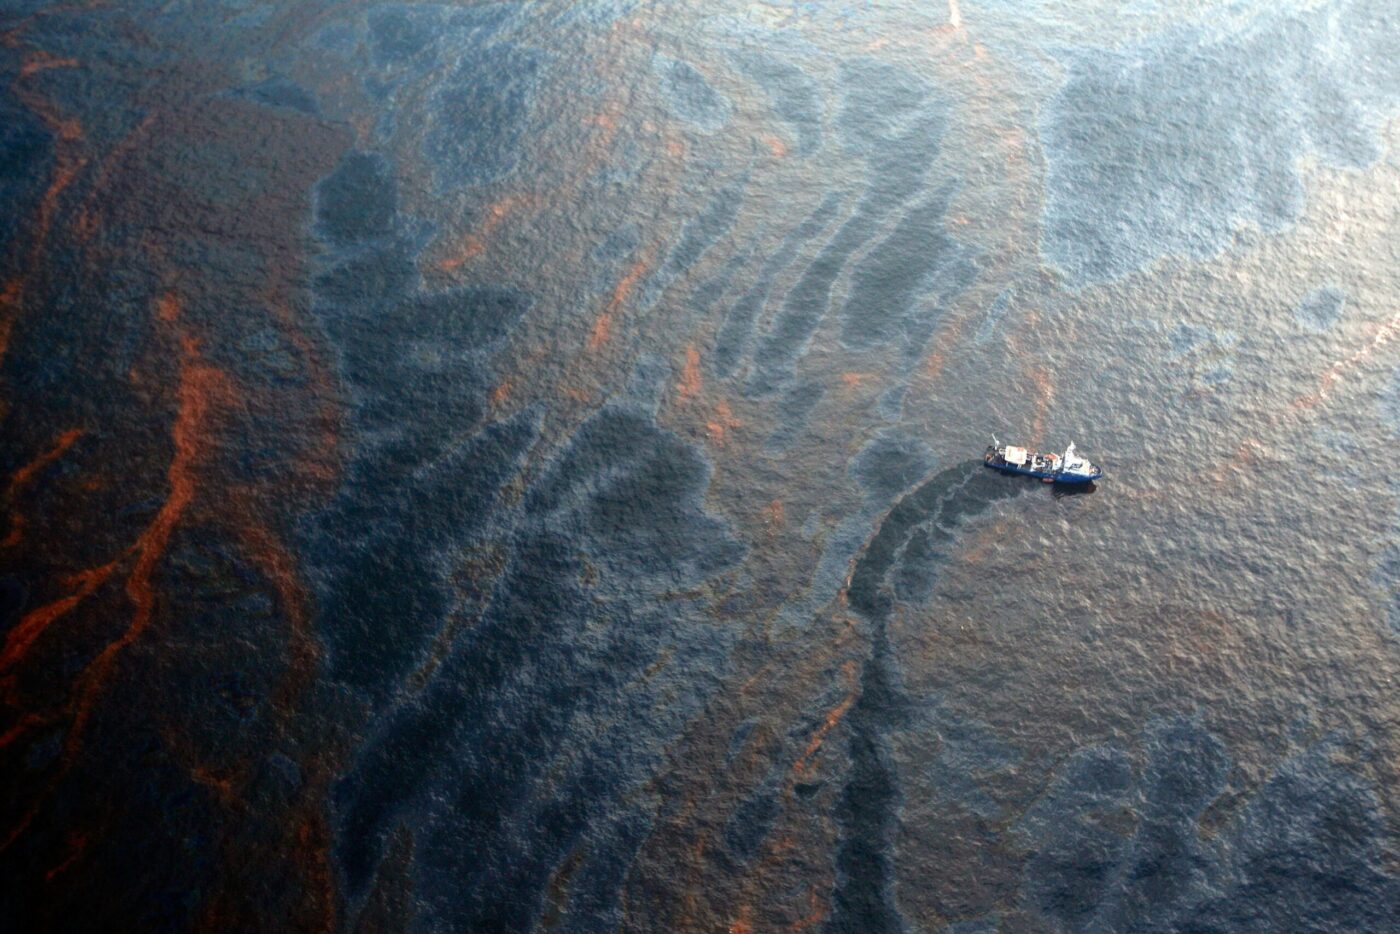 A boat works to collect oil that has leaked from the Deepwater Horizon wellhead in the Gulf of Mexico